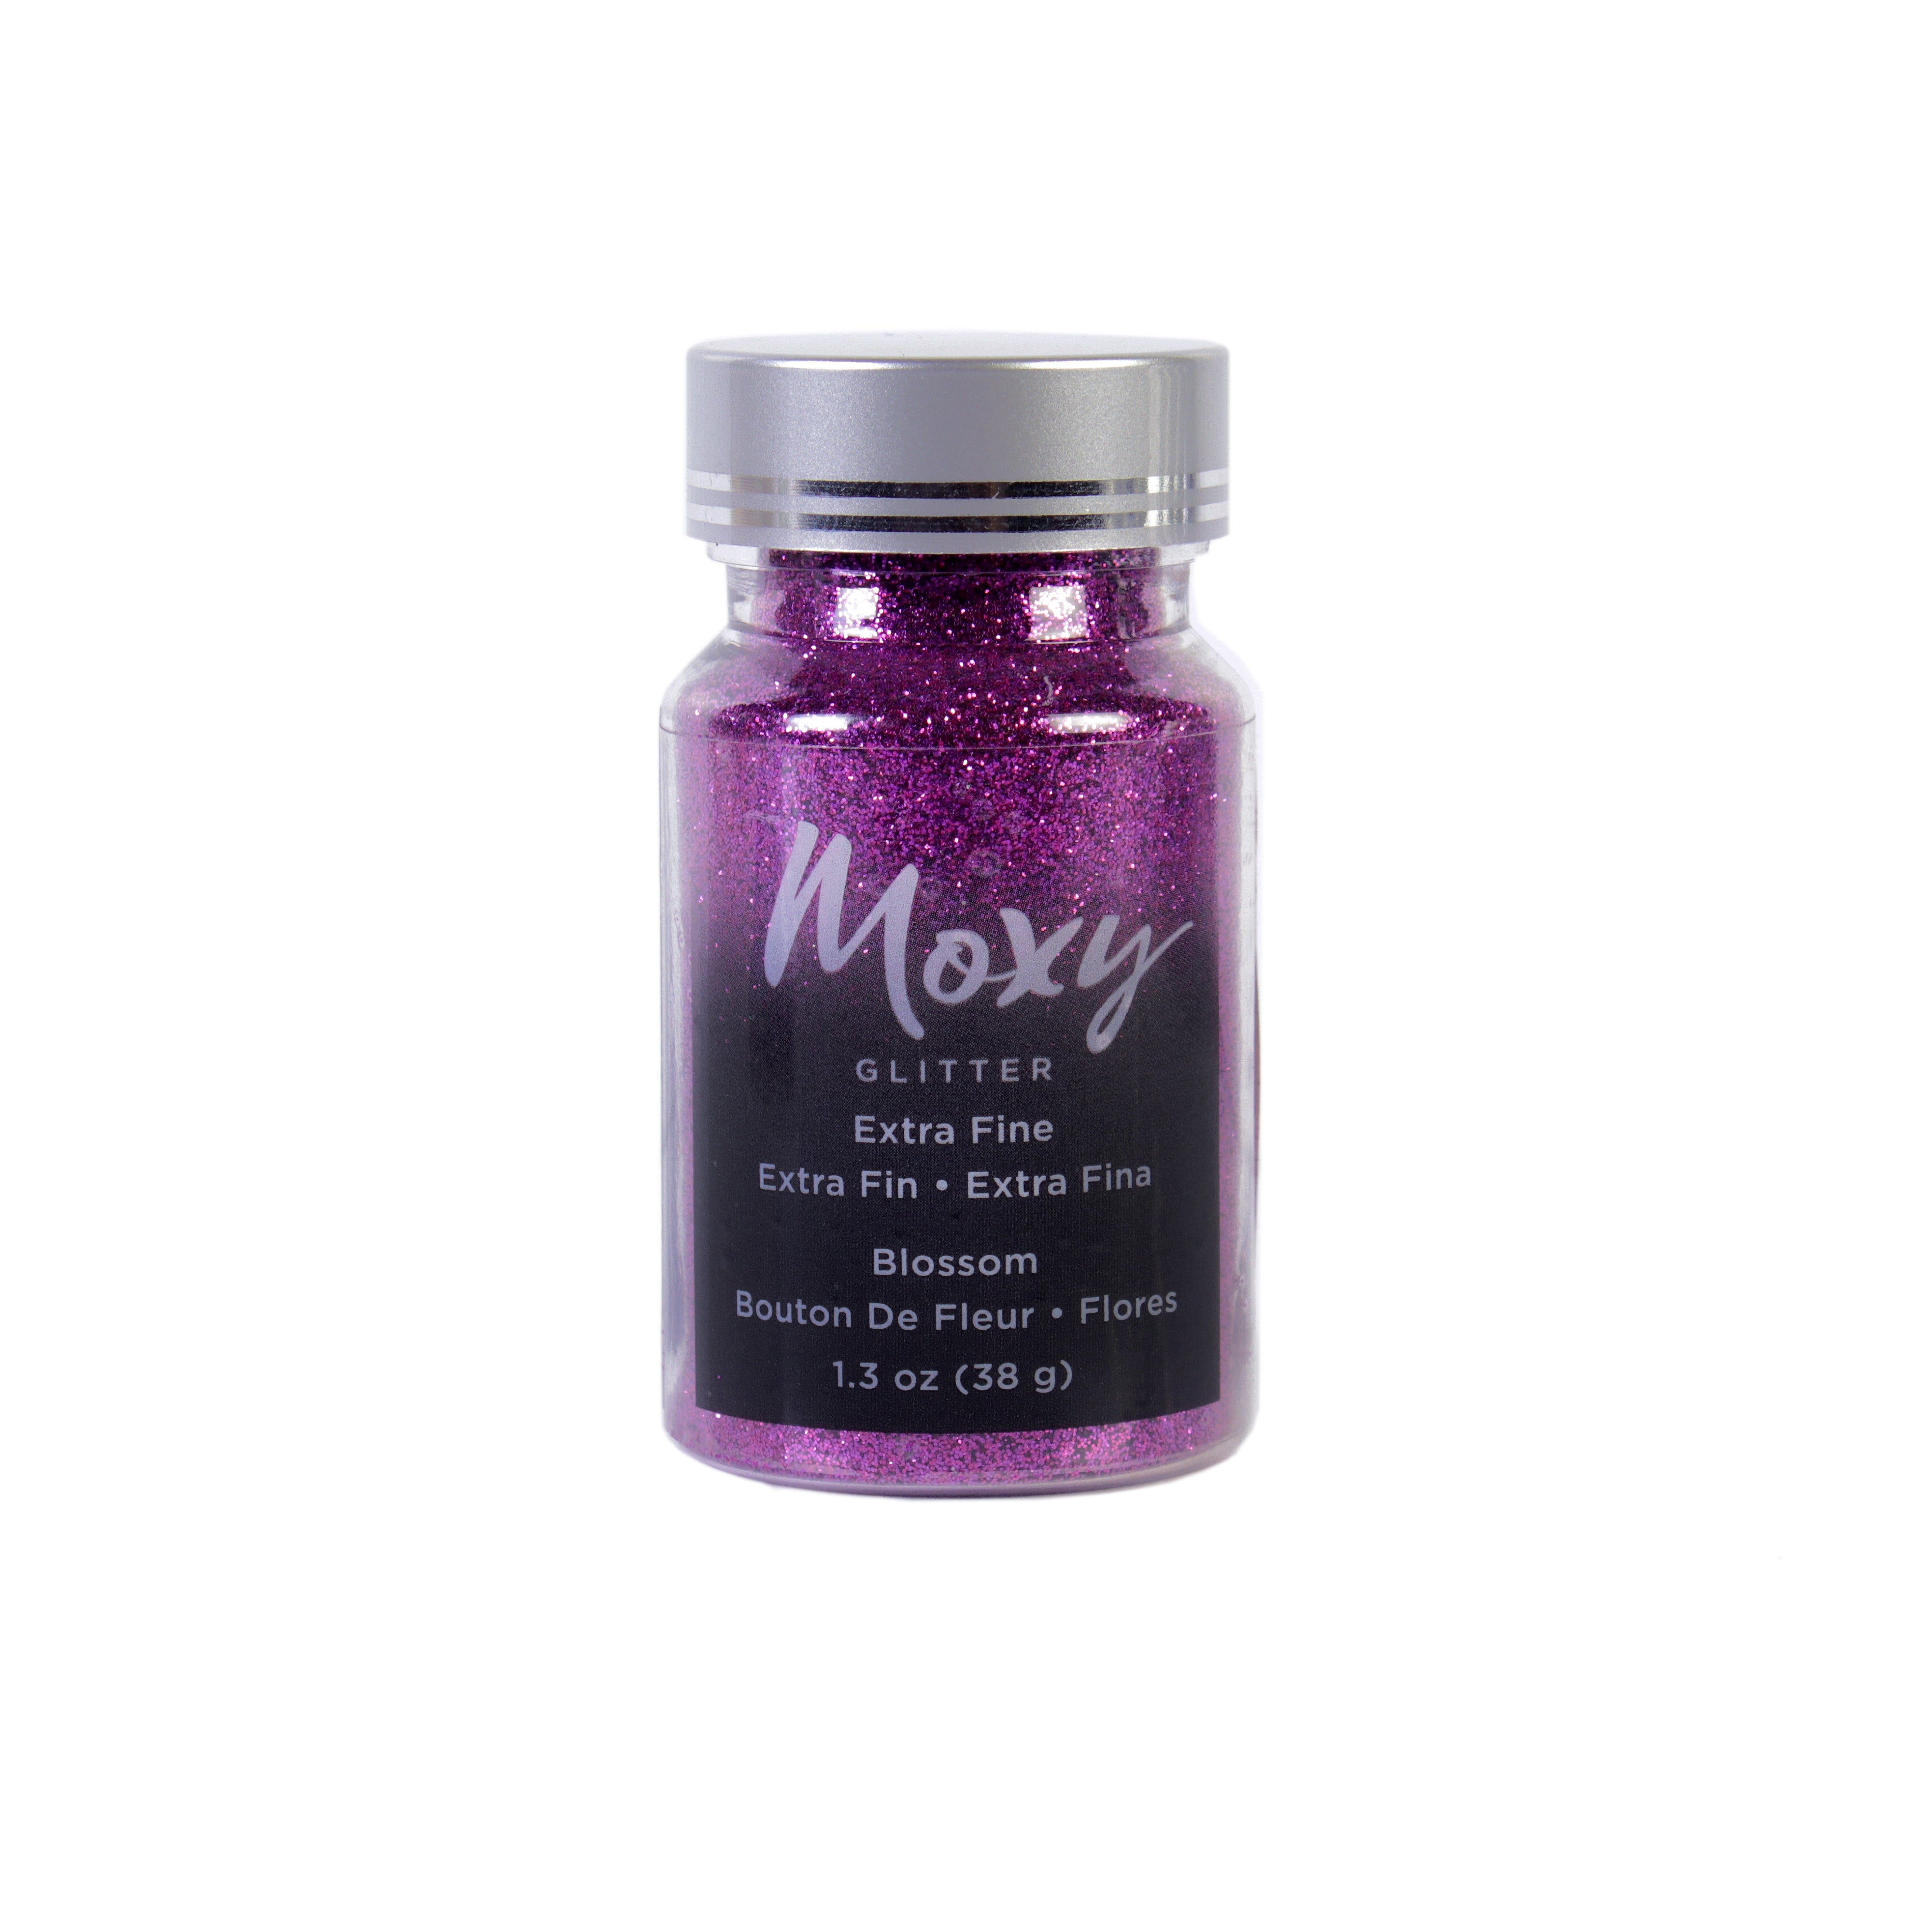 American Craft Moxy Glitter and Embossing Extra Fine Blossom 1.3oz Bottle